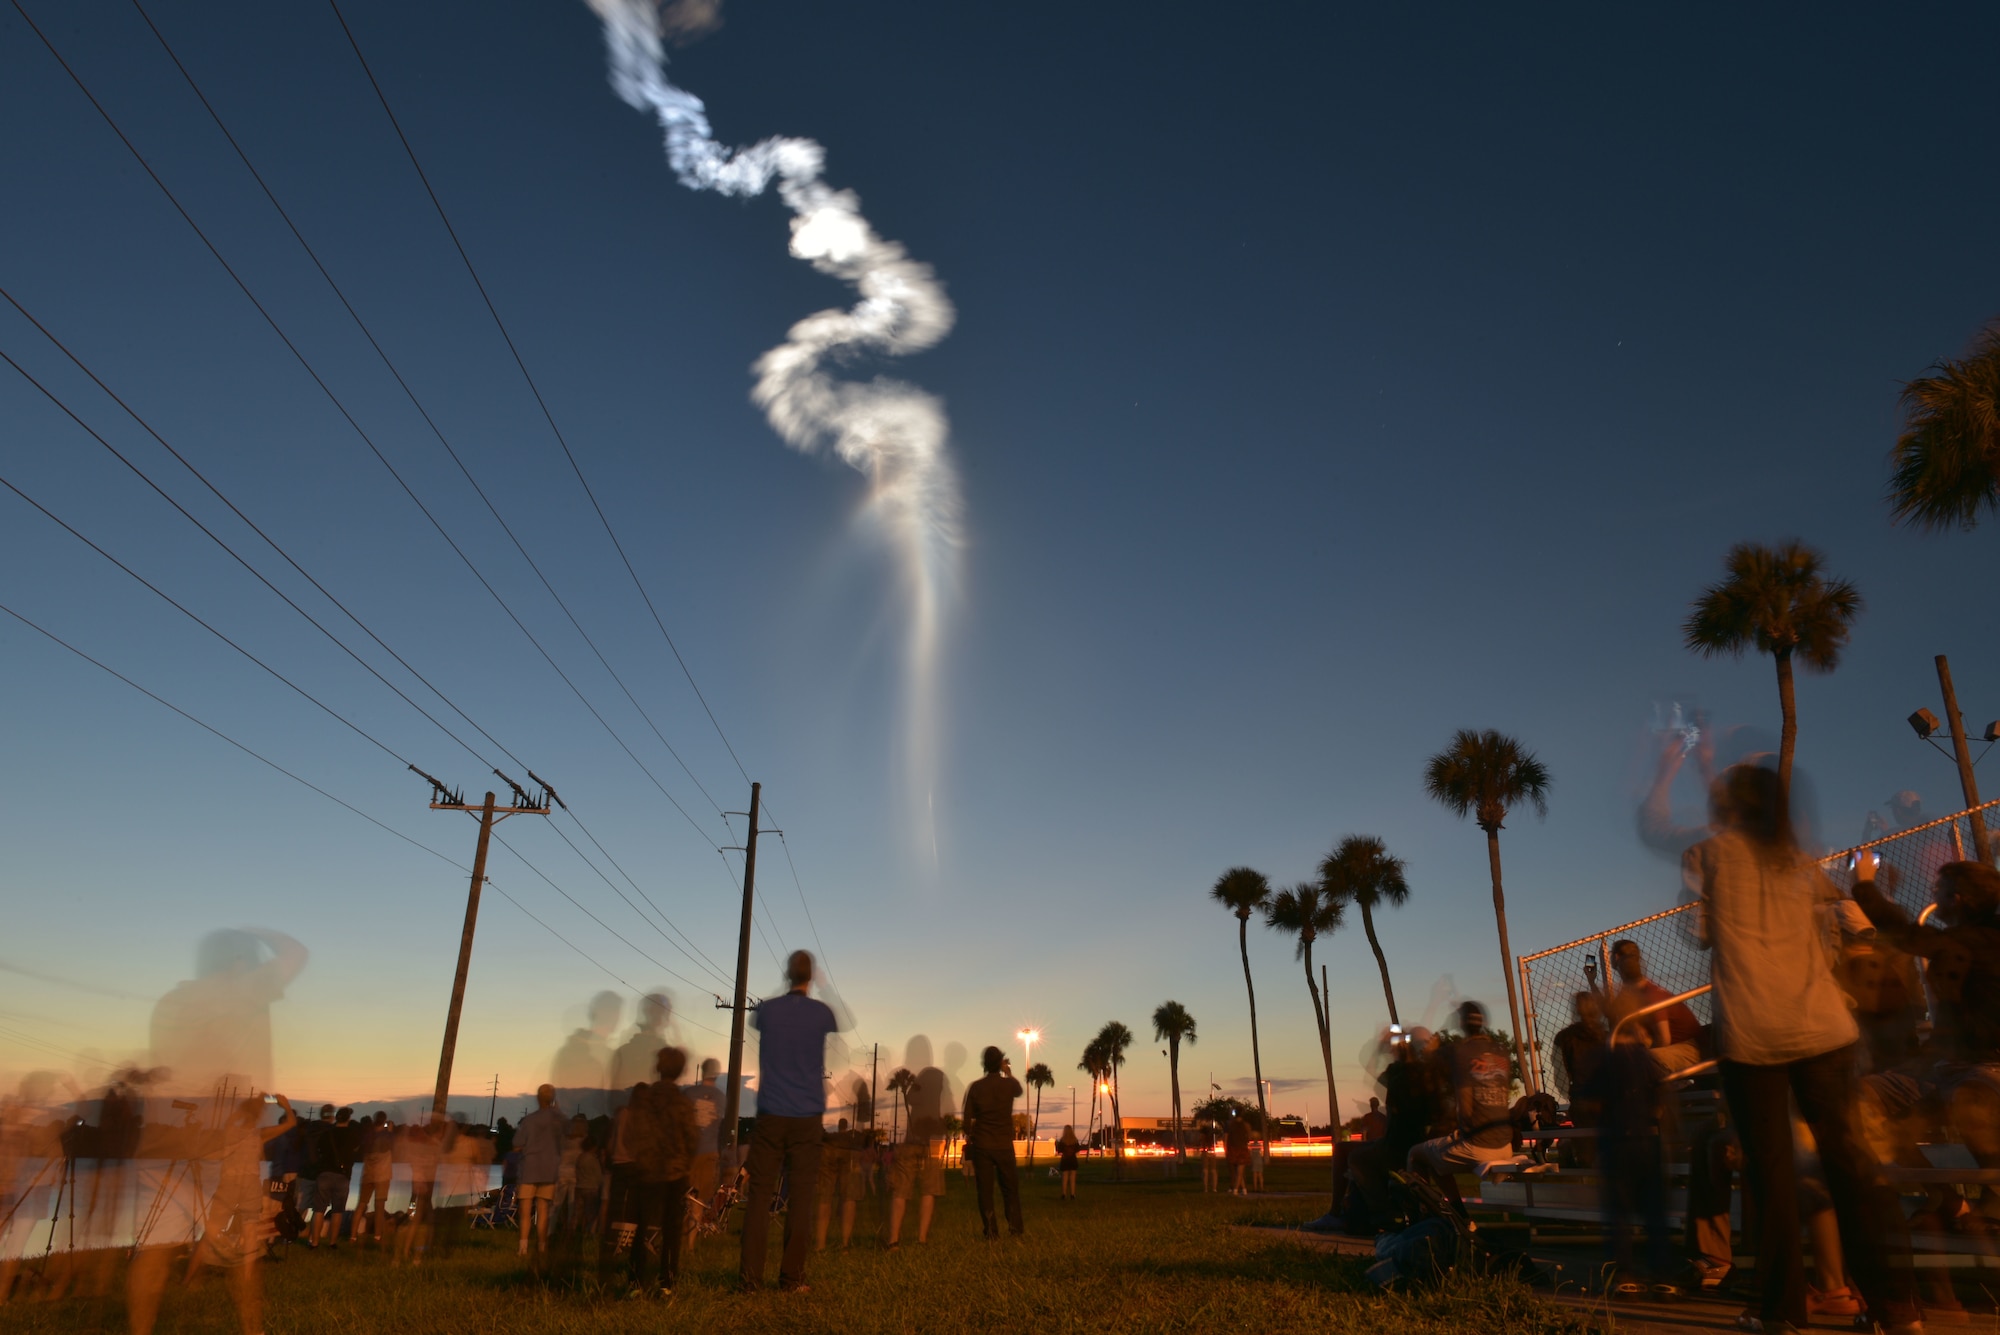 Dozens of people observe an Atlas V rocket Aug. 8, 2019, as it carries the Fifth Advanced Extremely High Frequency satellite toward space after it was launched from Cape Canaveral Air Force Station, Florida. In April, Airmen assigned to Travis Air Force Base, California, transported the satellite to Florida. The satellite will provide enhanced communications for high-priority military assets. (U.S. Air Force photo by Airman 1st Class Dalton Williams)